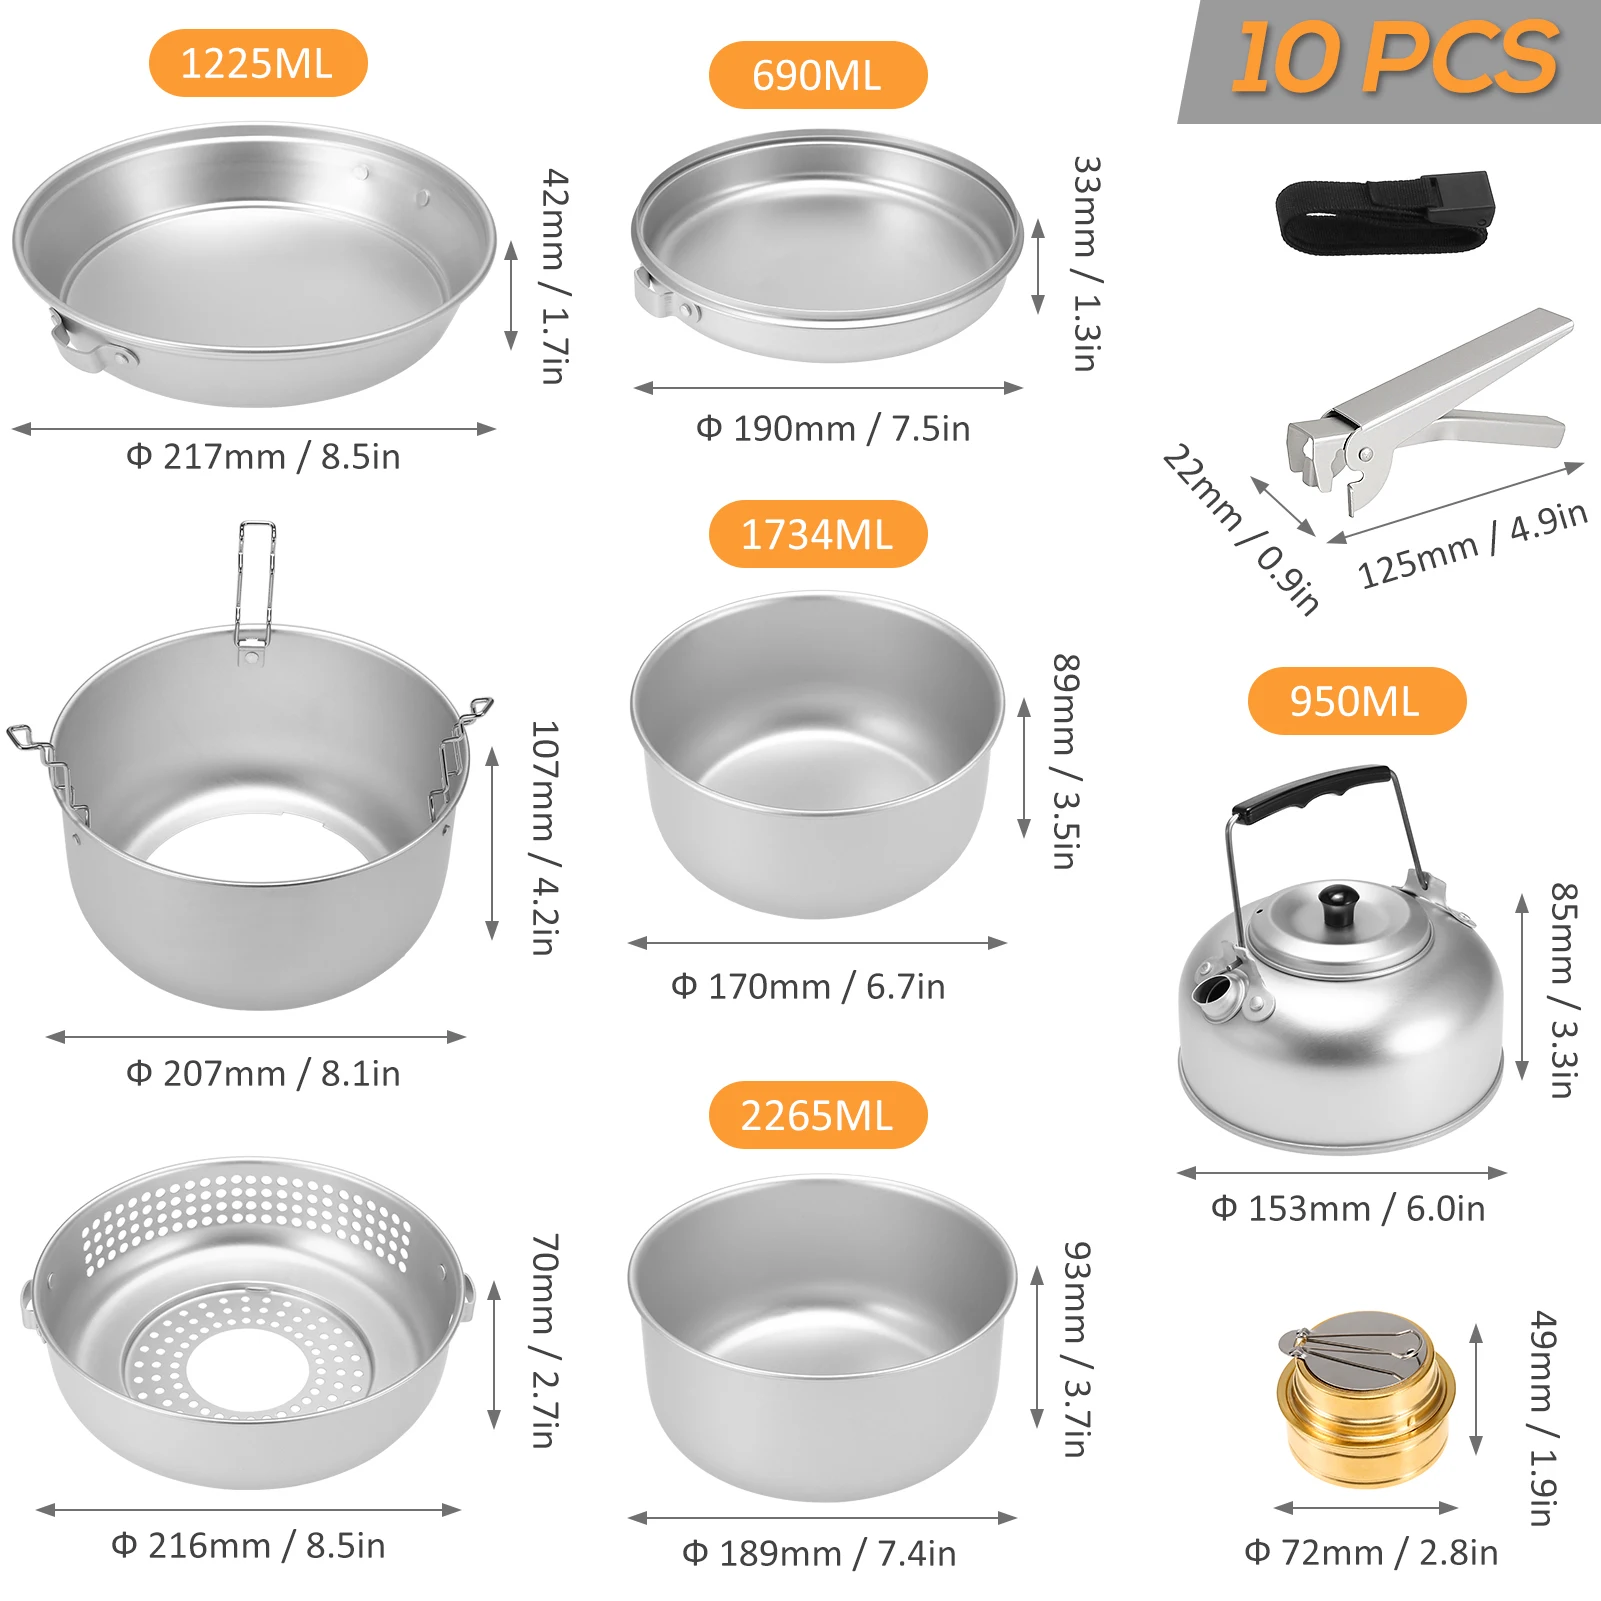 Details about   Outdoor Camping Stove Kit Dish Plates Pots Water Kettle Stove Hand Vice 10 PCS